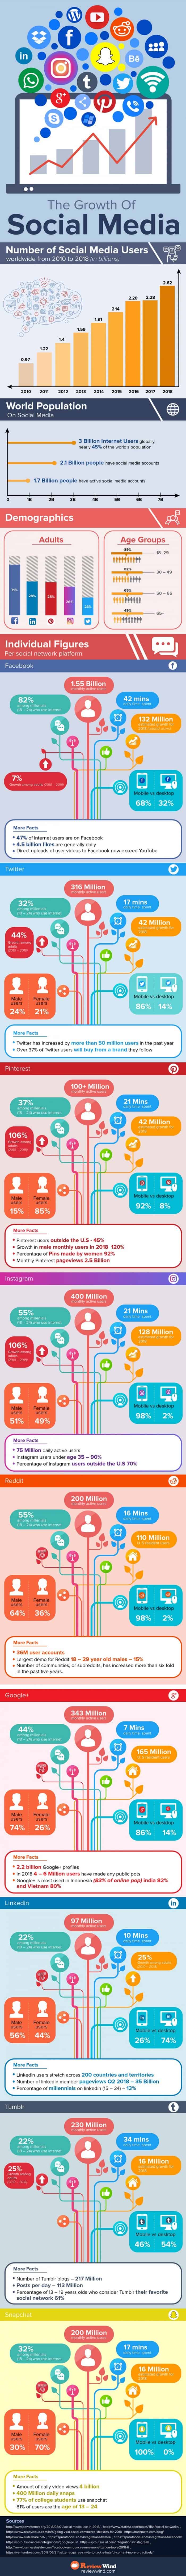 The Growth Of Social Media